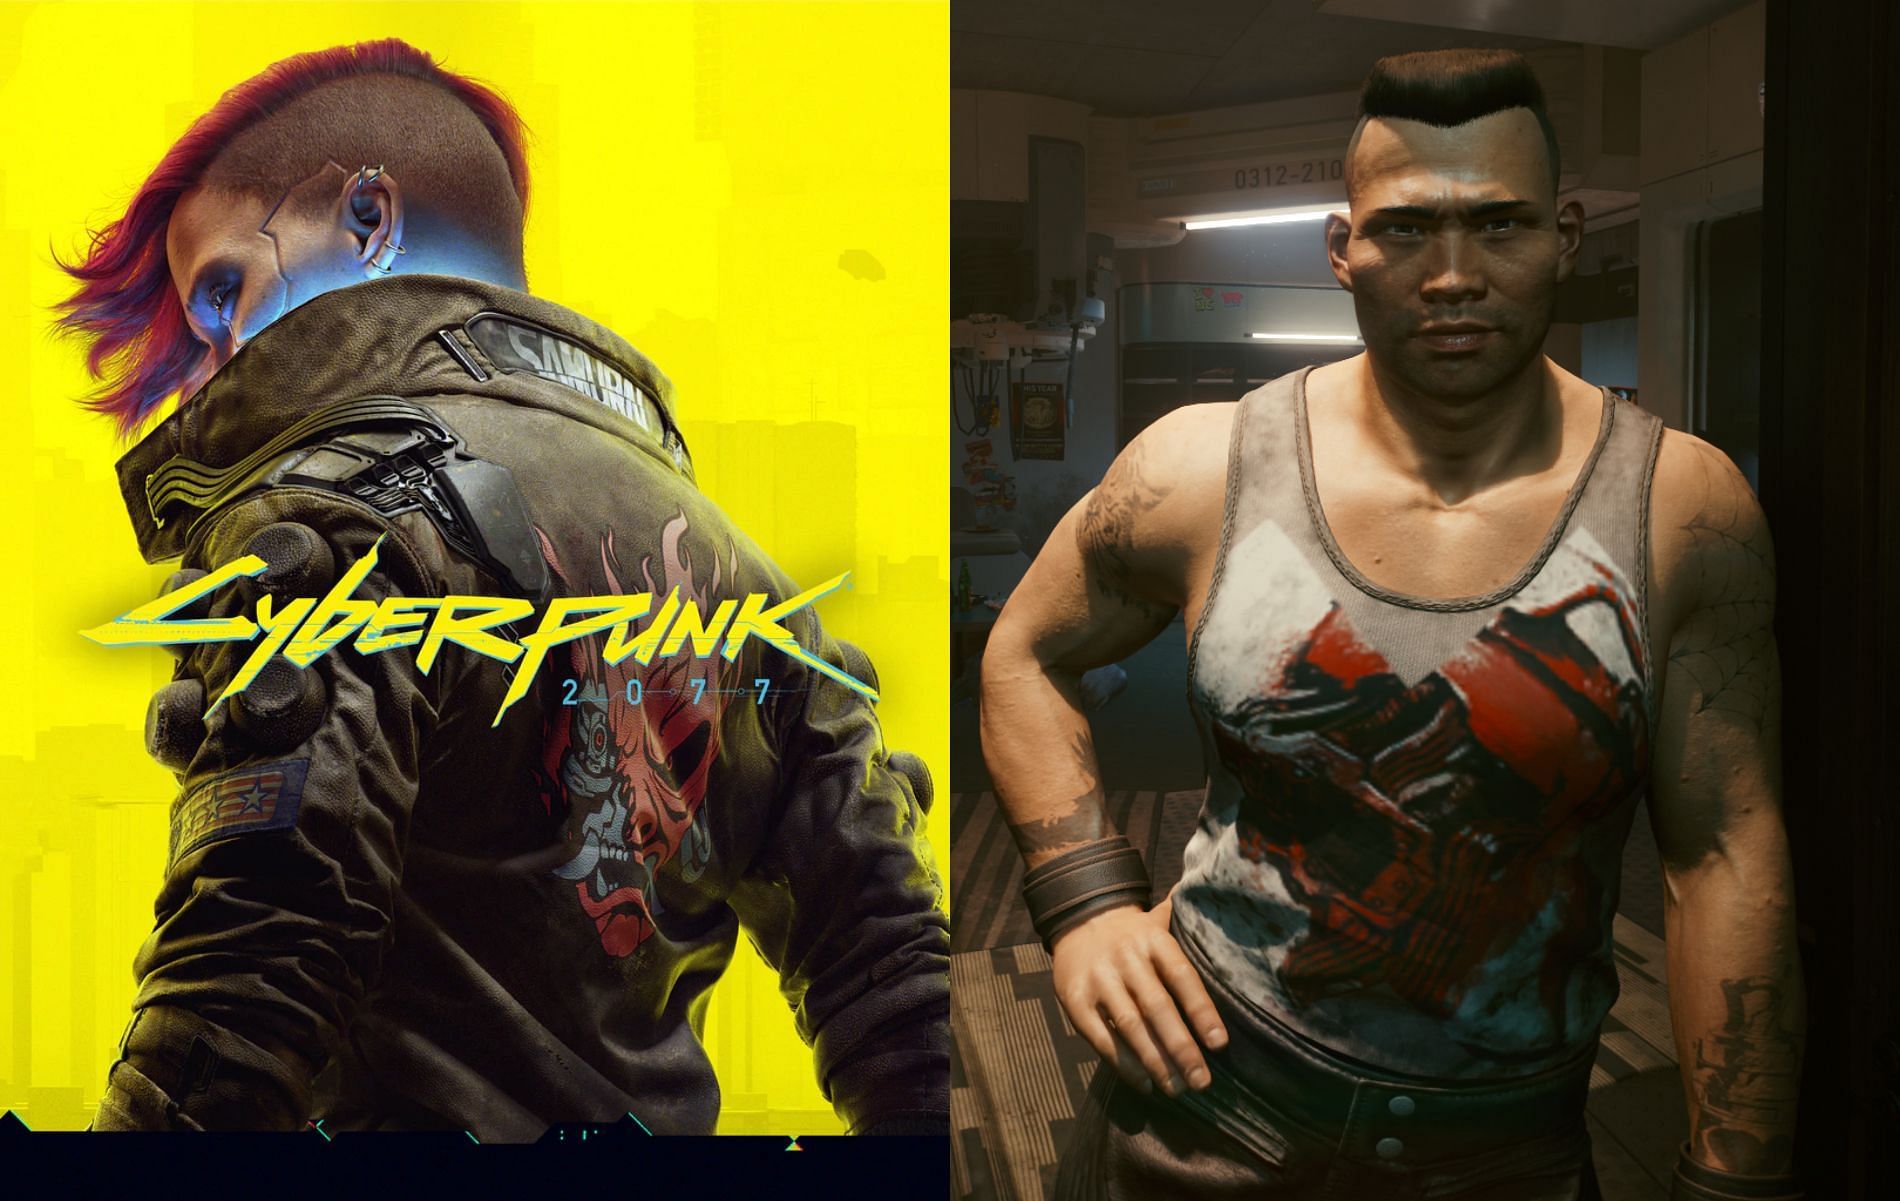 This one of the earlier side missions to be enxountered in Cyberpunk 2077 (Images via CD Projekt RED)